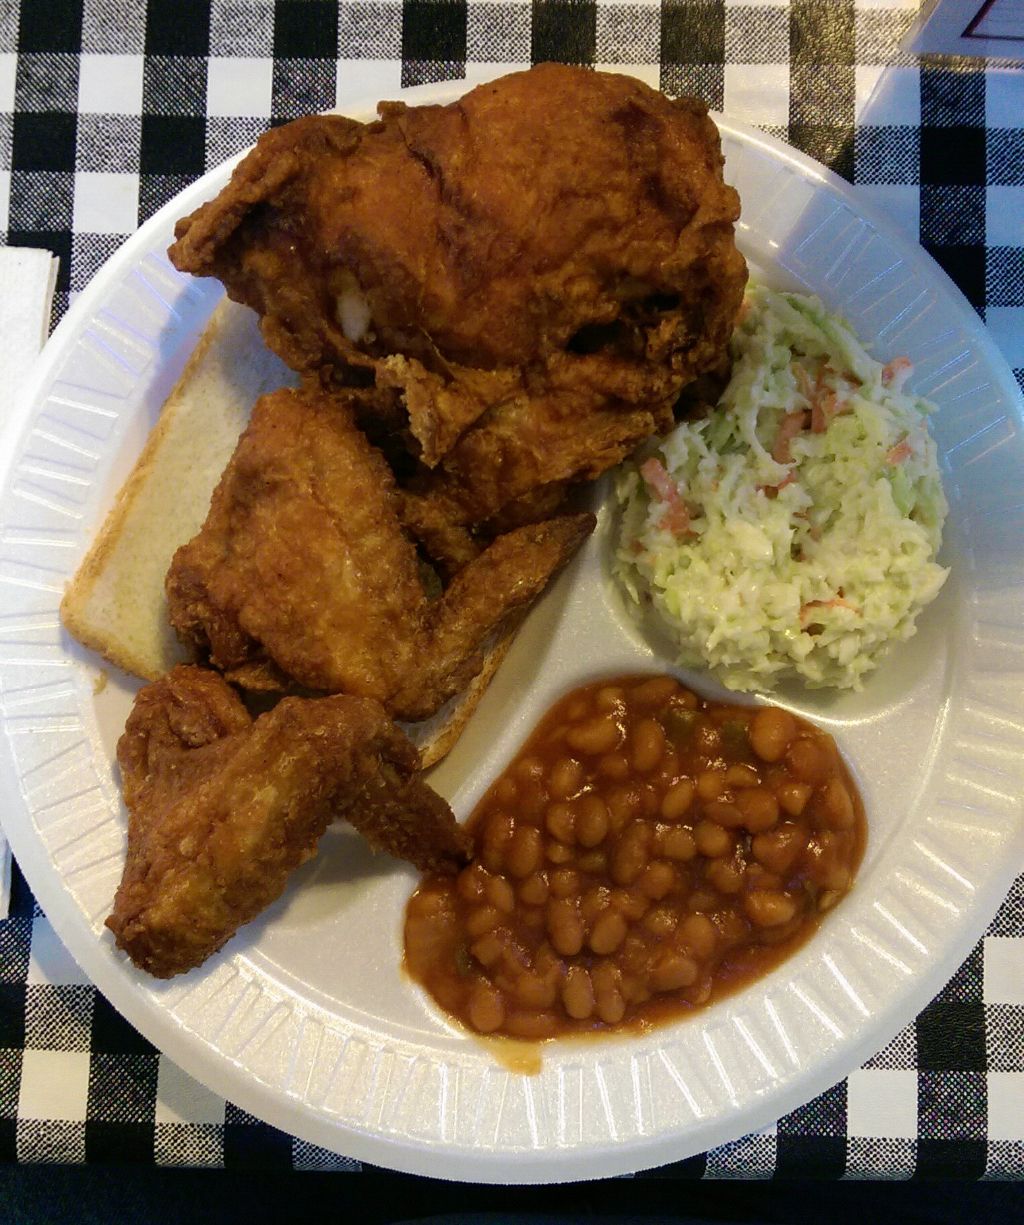 My dinner.  I had a breast and 2 wings plus beans and coleslaw